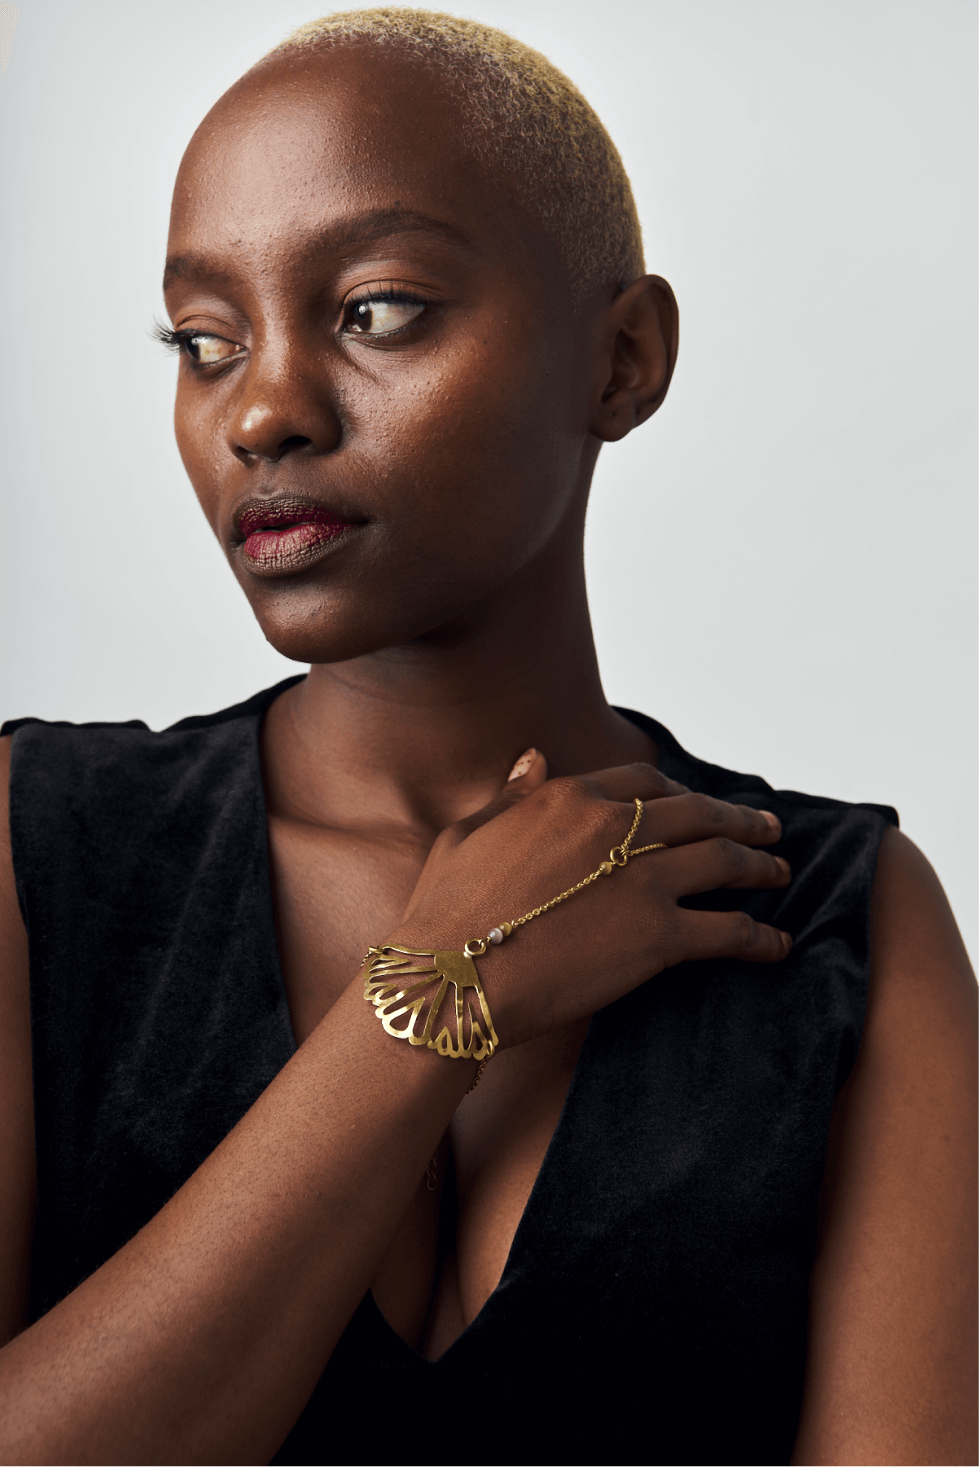 Shop Kanga Flower No.1 Bracelet by Tiger Tail Twister on Arrai. Discover stylish, affordable clothing, jewelry, handbags and unique handmade pieces from top Kenyan & African fashion brands prioritising sustainability and quality craftsmanship.